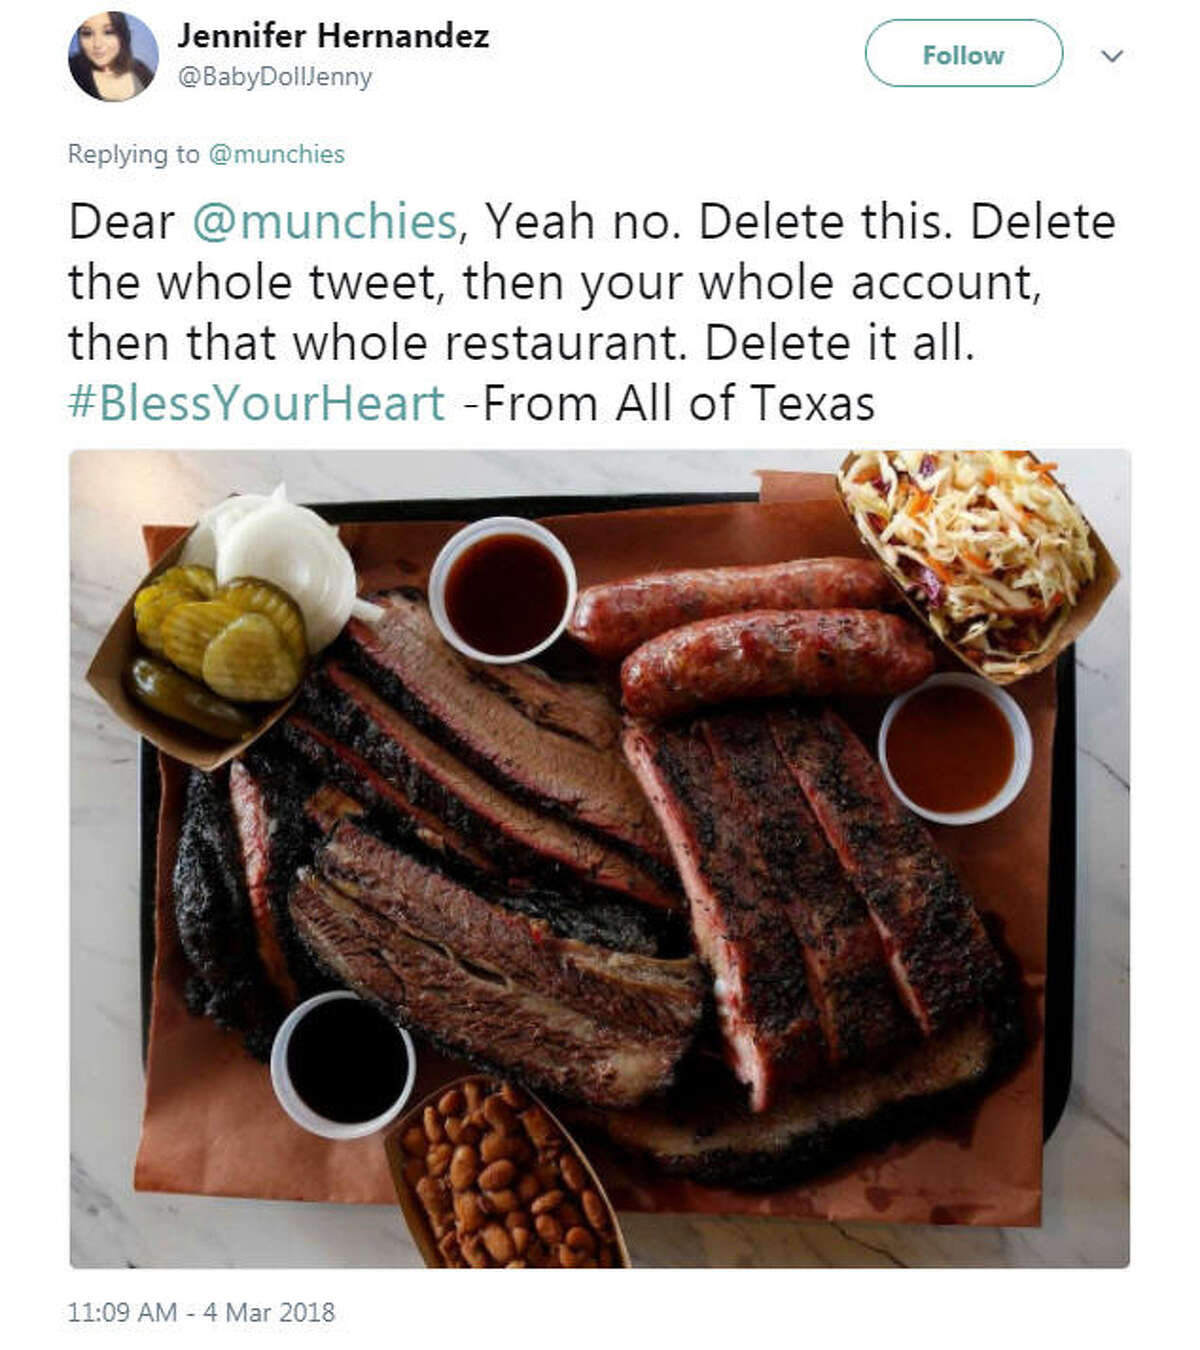 "Dear @munchies, Yeah no. Delete this. Delete the whole tweet, then your whole account, then that whole restaurant. Delete it all. #BlessYourHeart -From All of Texas" Source: Twitter